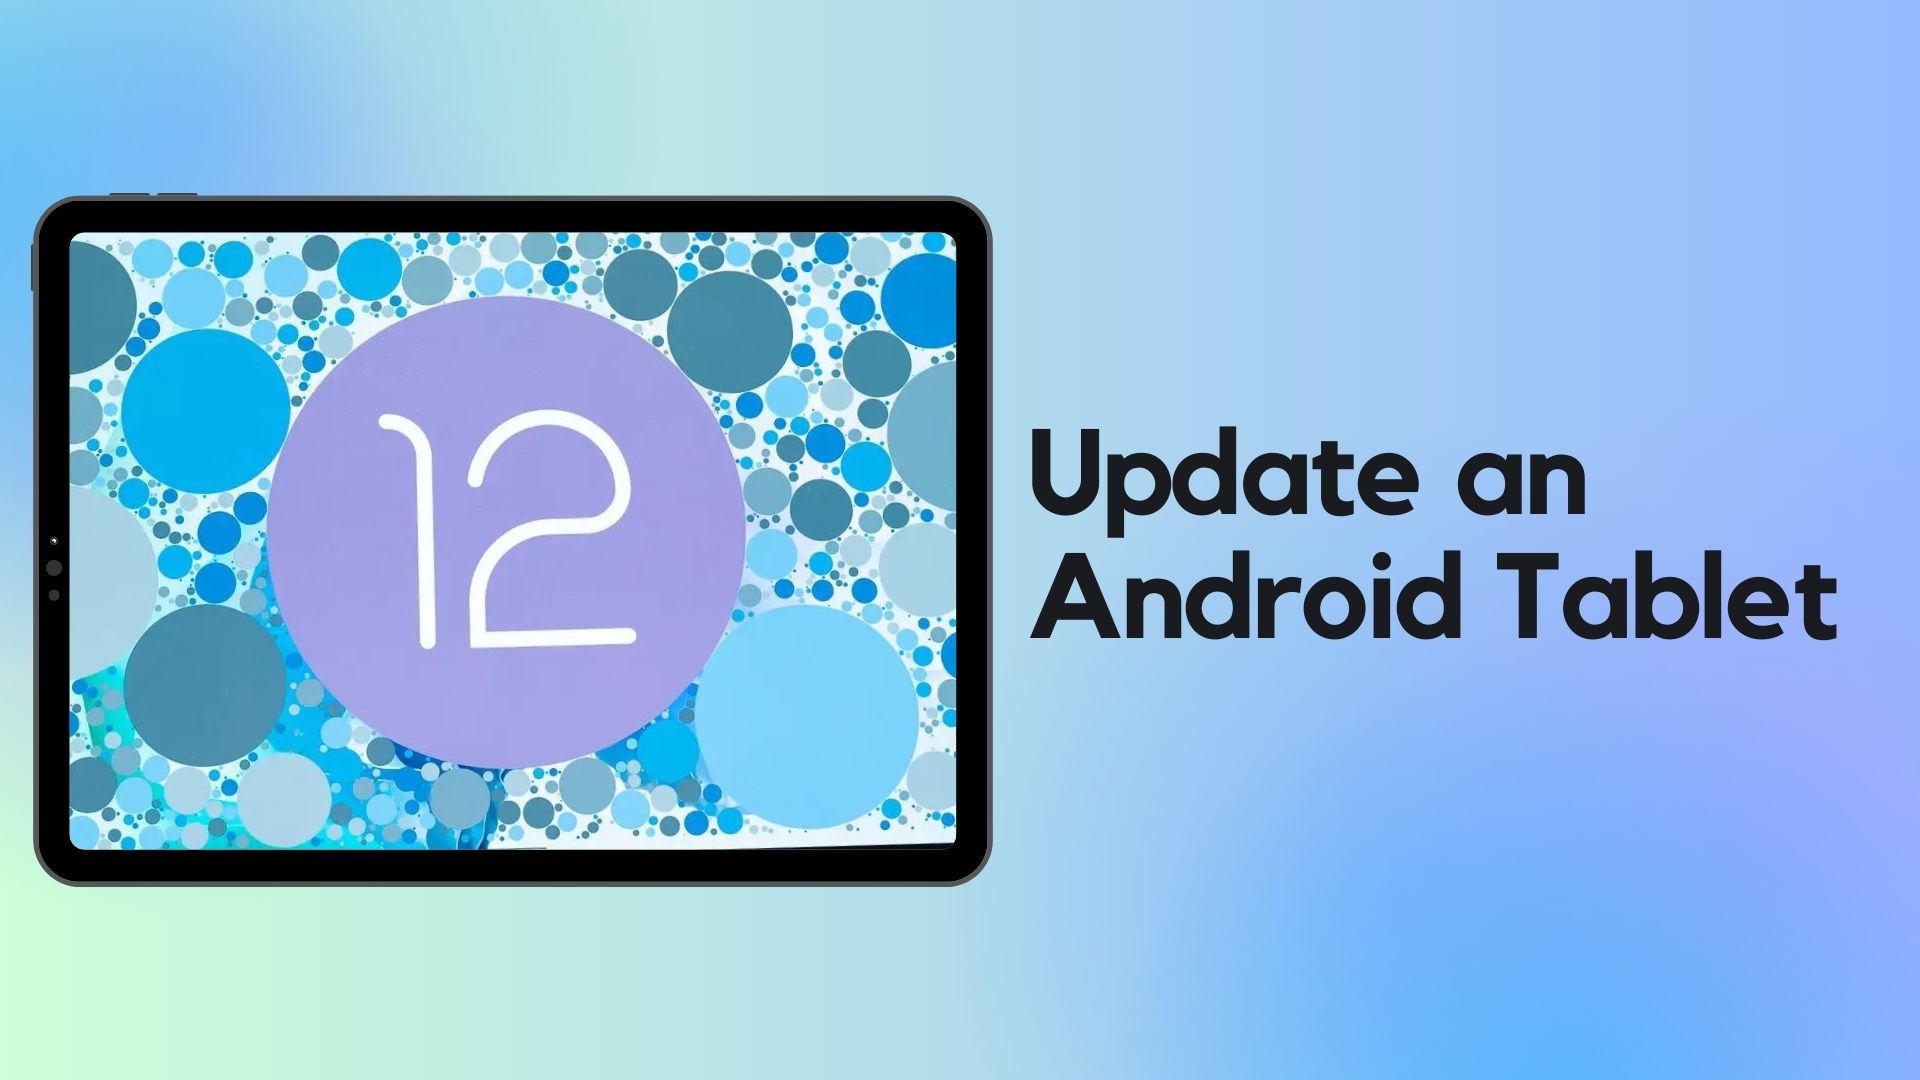 How to update an Android tablet